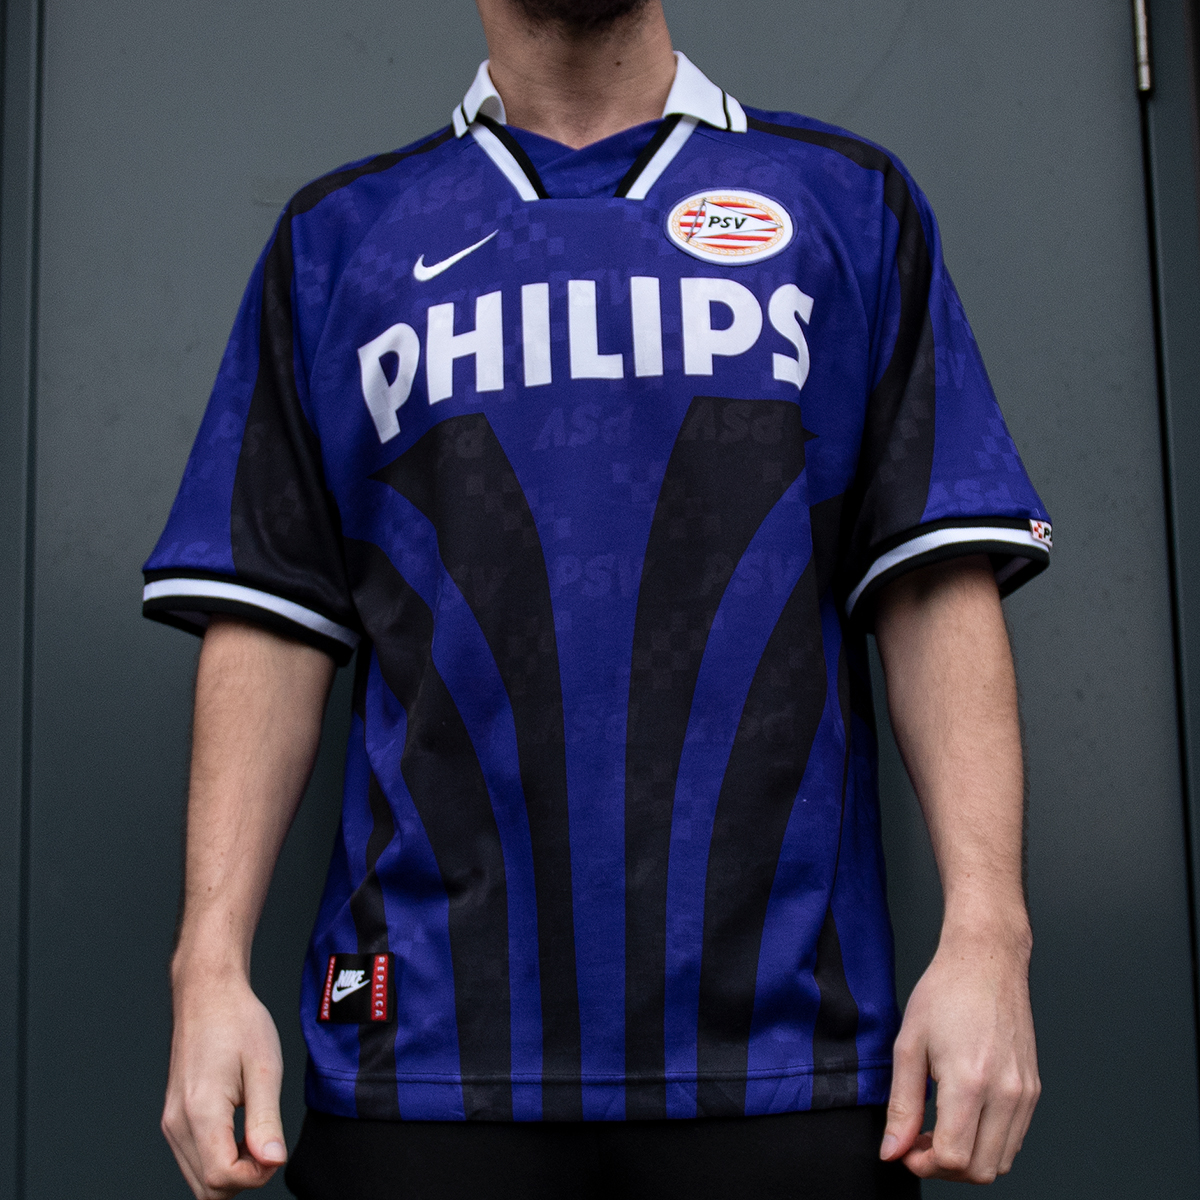 jeans terras Enten Classic Football Shirts on Twitter: "PSV 1996 Away by Nike 🇳🇱 This  glorious nineties shirt from Nike will be hitting the site next week! 👀  https://t.co/svbAa4ZDTD" / Twitter